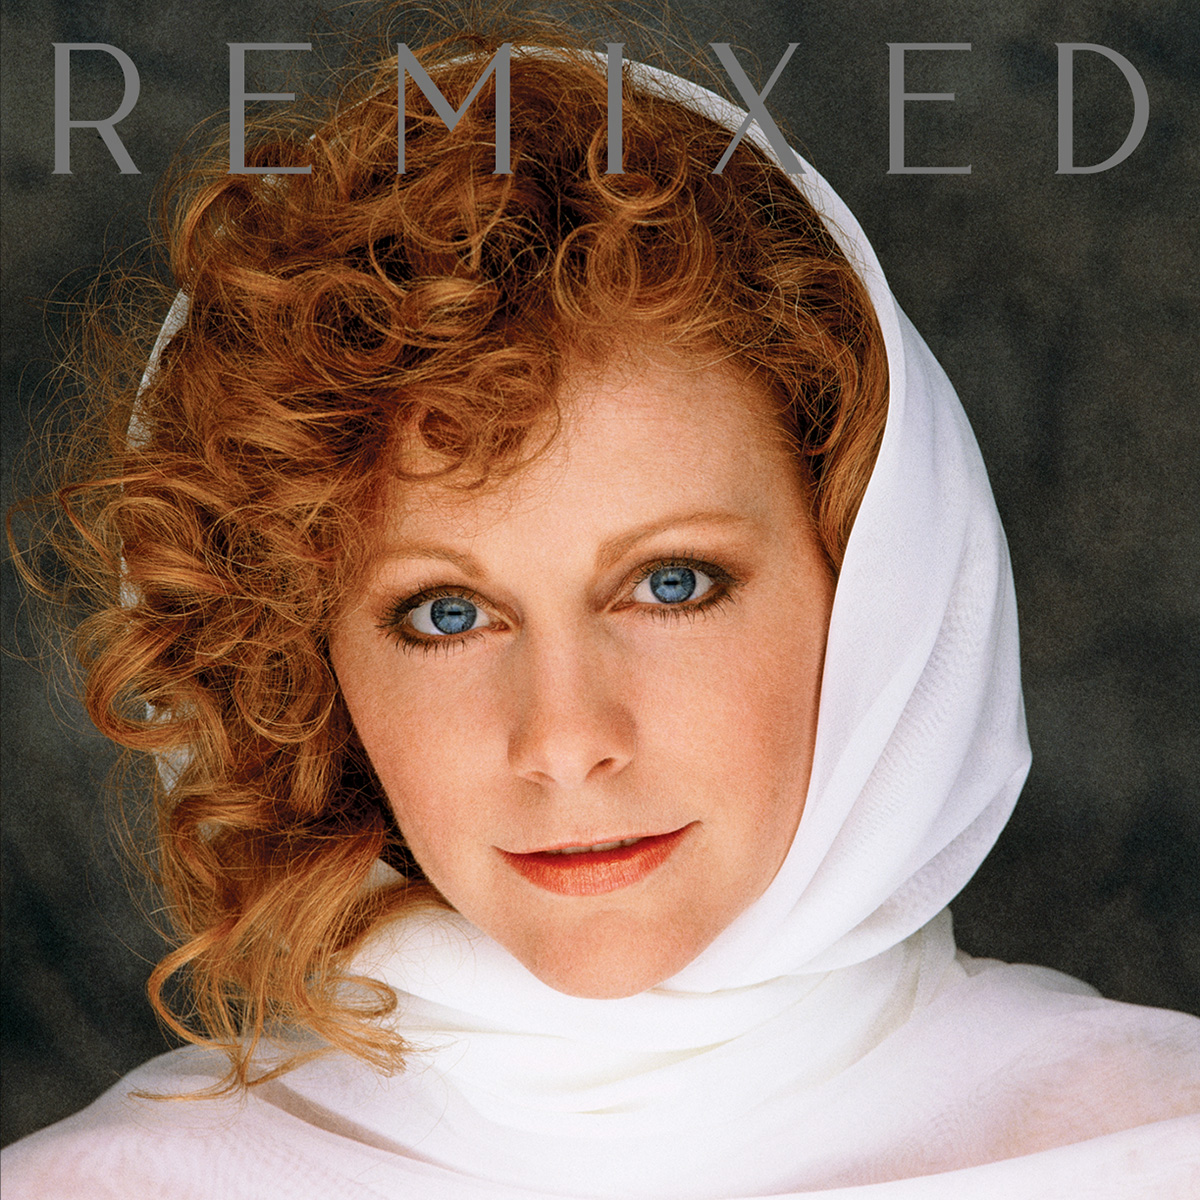 Just more 2 days until REVIVED REMIXED REVISITED is released! REMIXED features some of my greatest hits like you've never heard them before produced by @daveaude, @DJTracyYoung, @lafemmebear and more. Pre-order your copy now: strm.to/RebaRevivedRem…